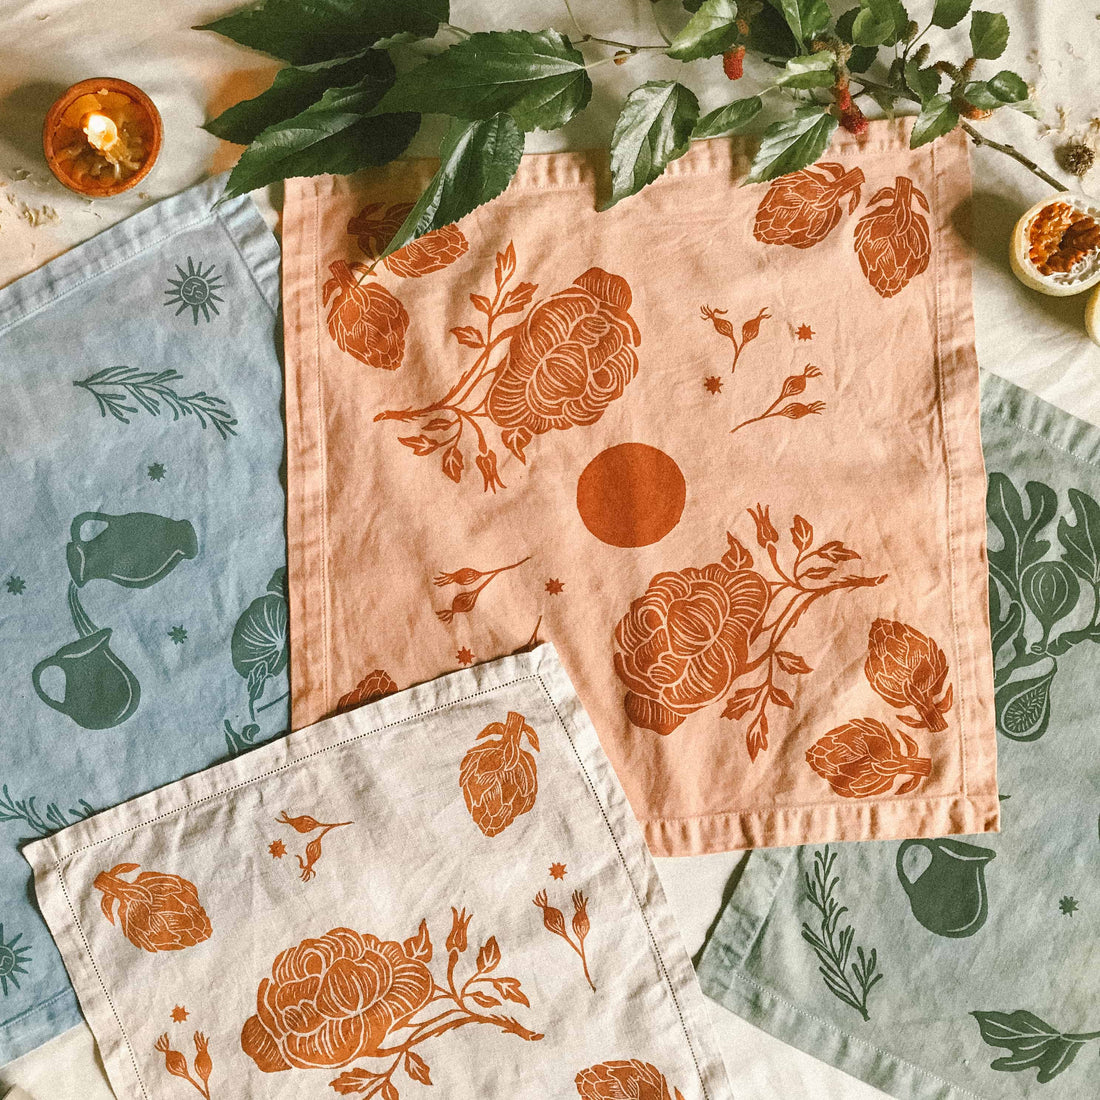 A flat lay of plant dyed and block printed altar cloths made by Hina Luna